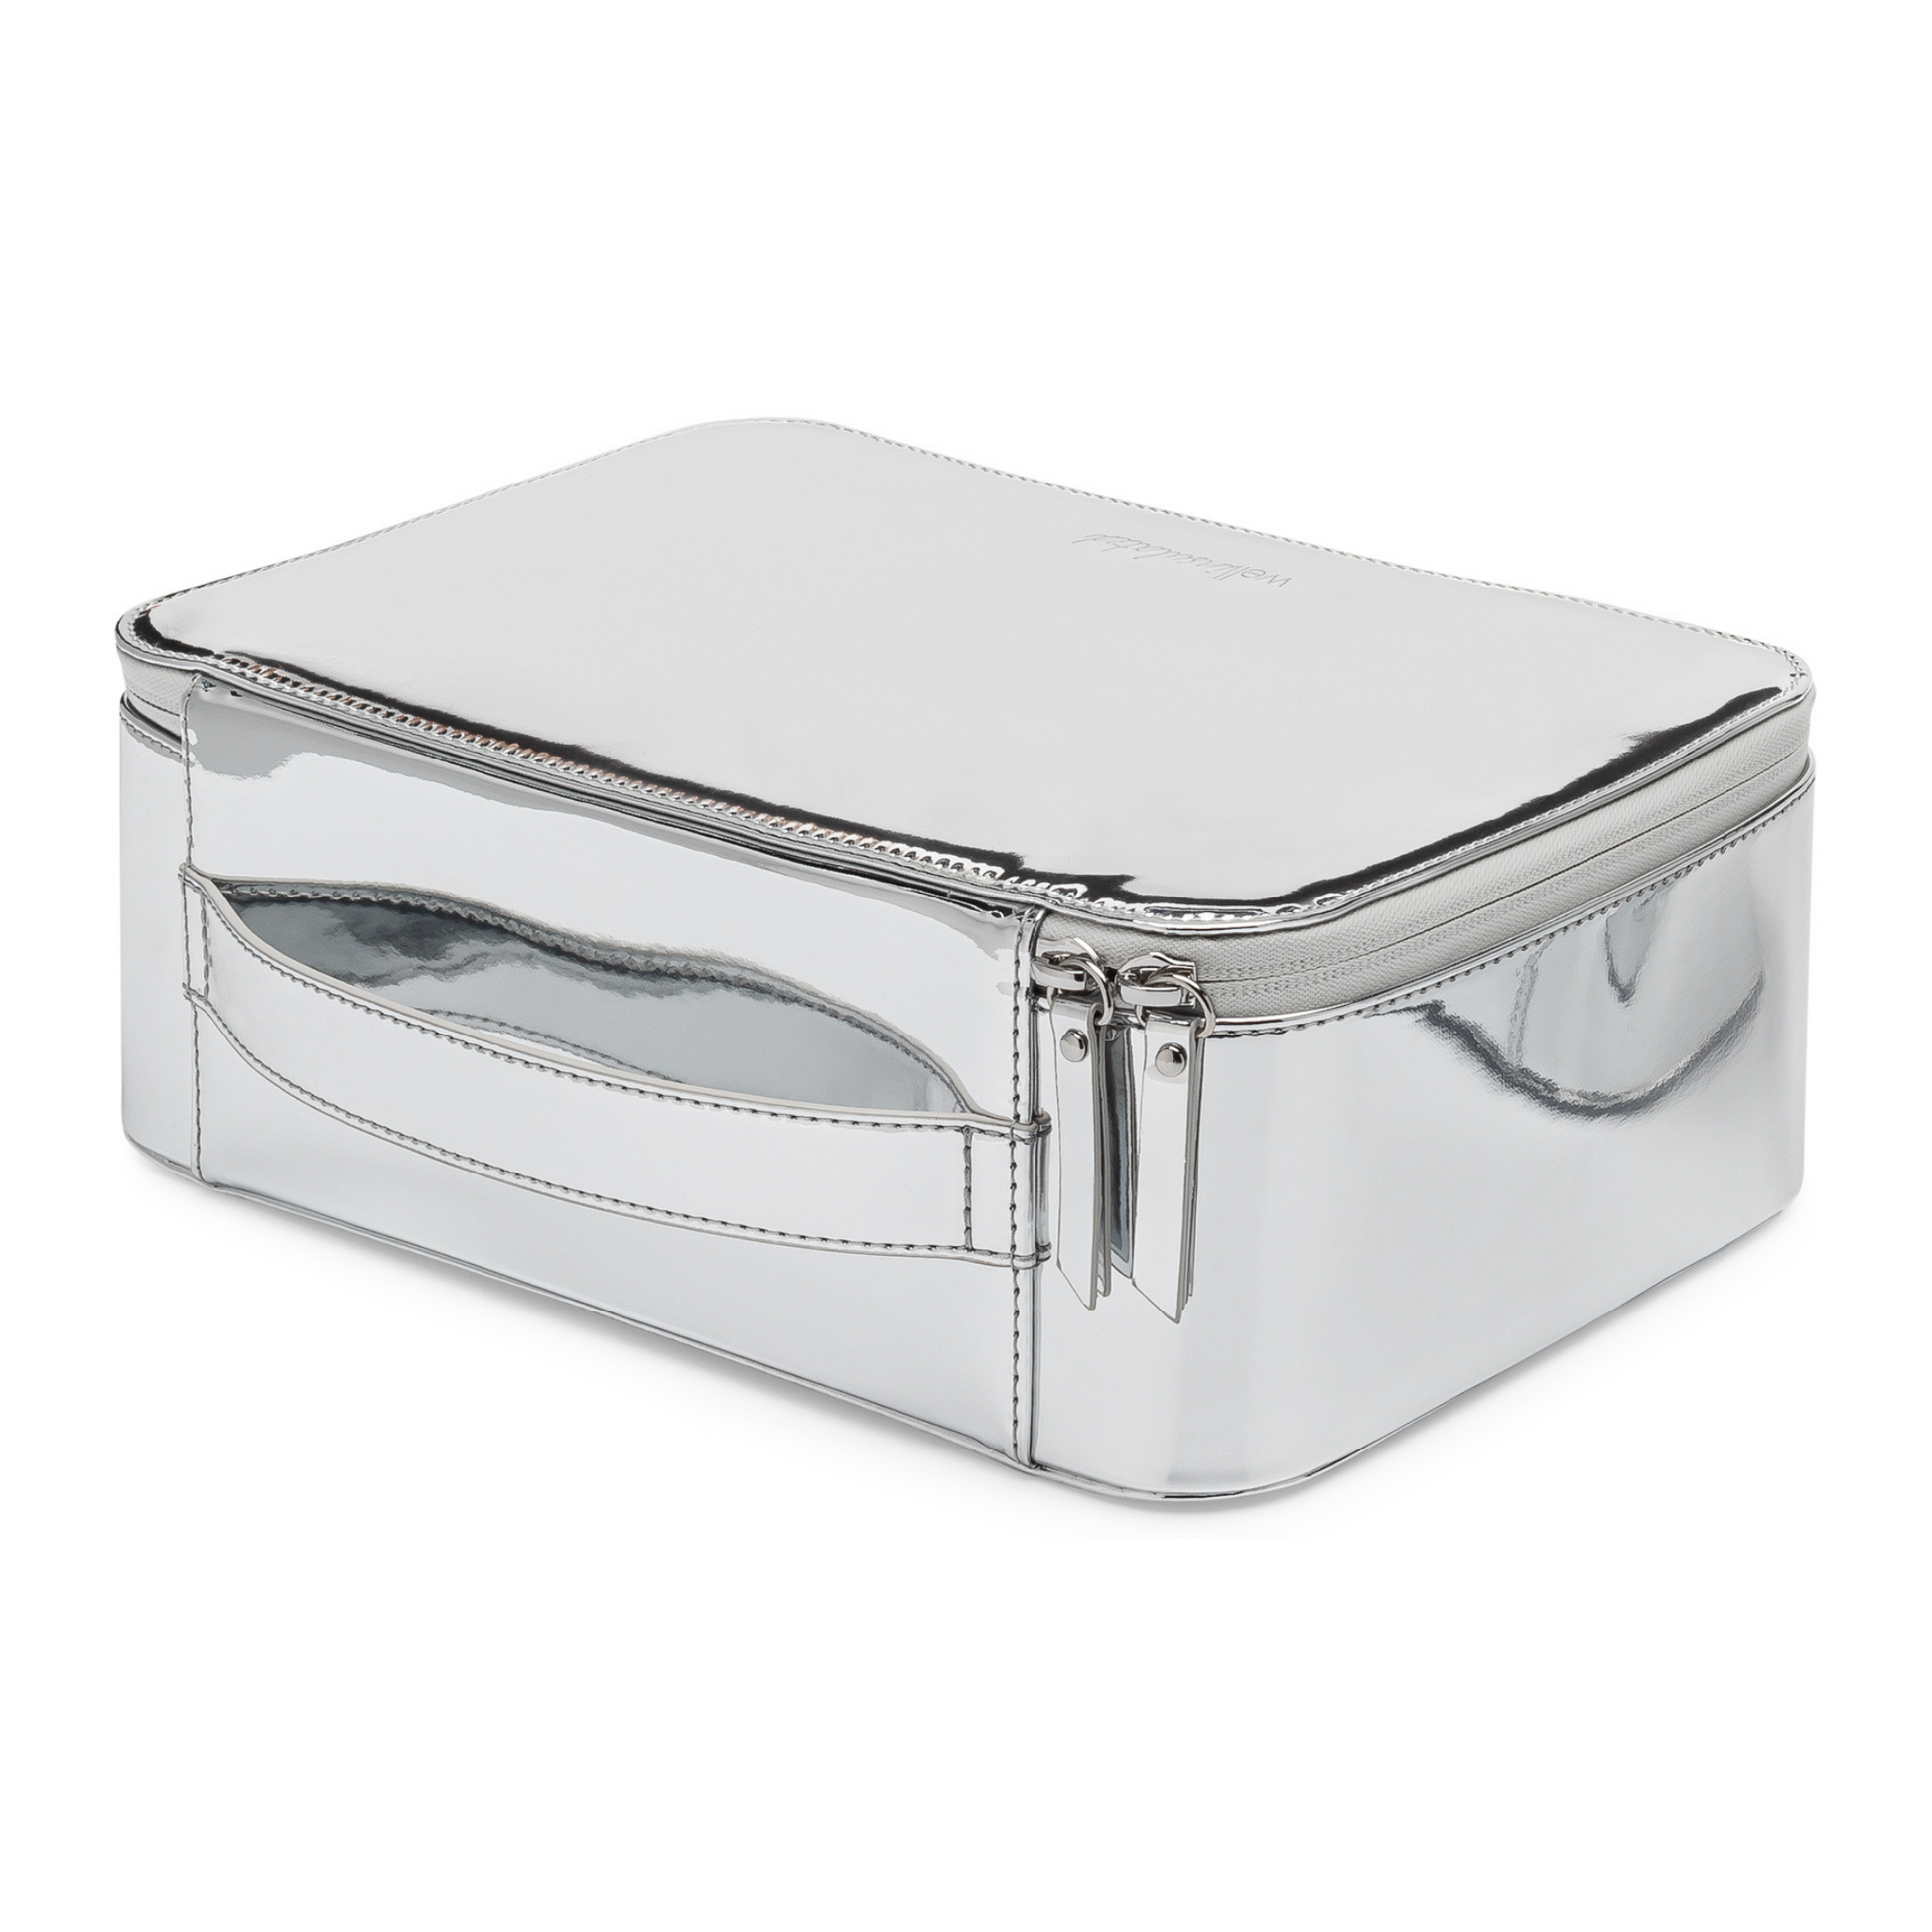 Side angle view of the Well Insulated Performance Travel Case. The handle on the top of the case is visible. The case is metallic silver and the two zippers are featured.